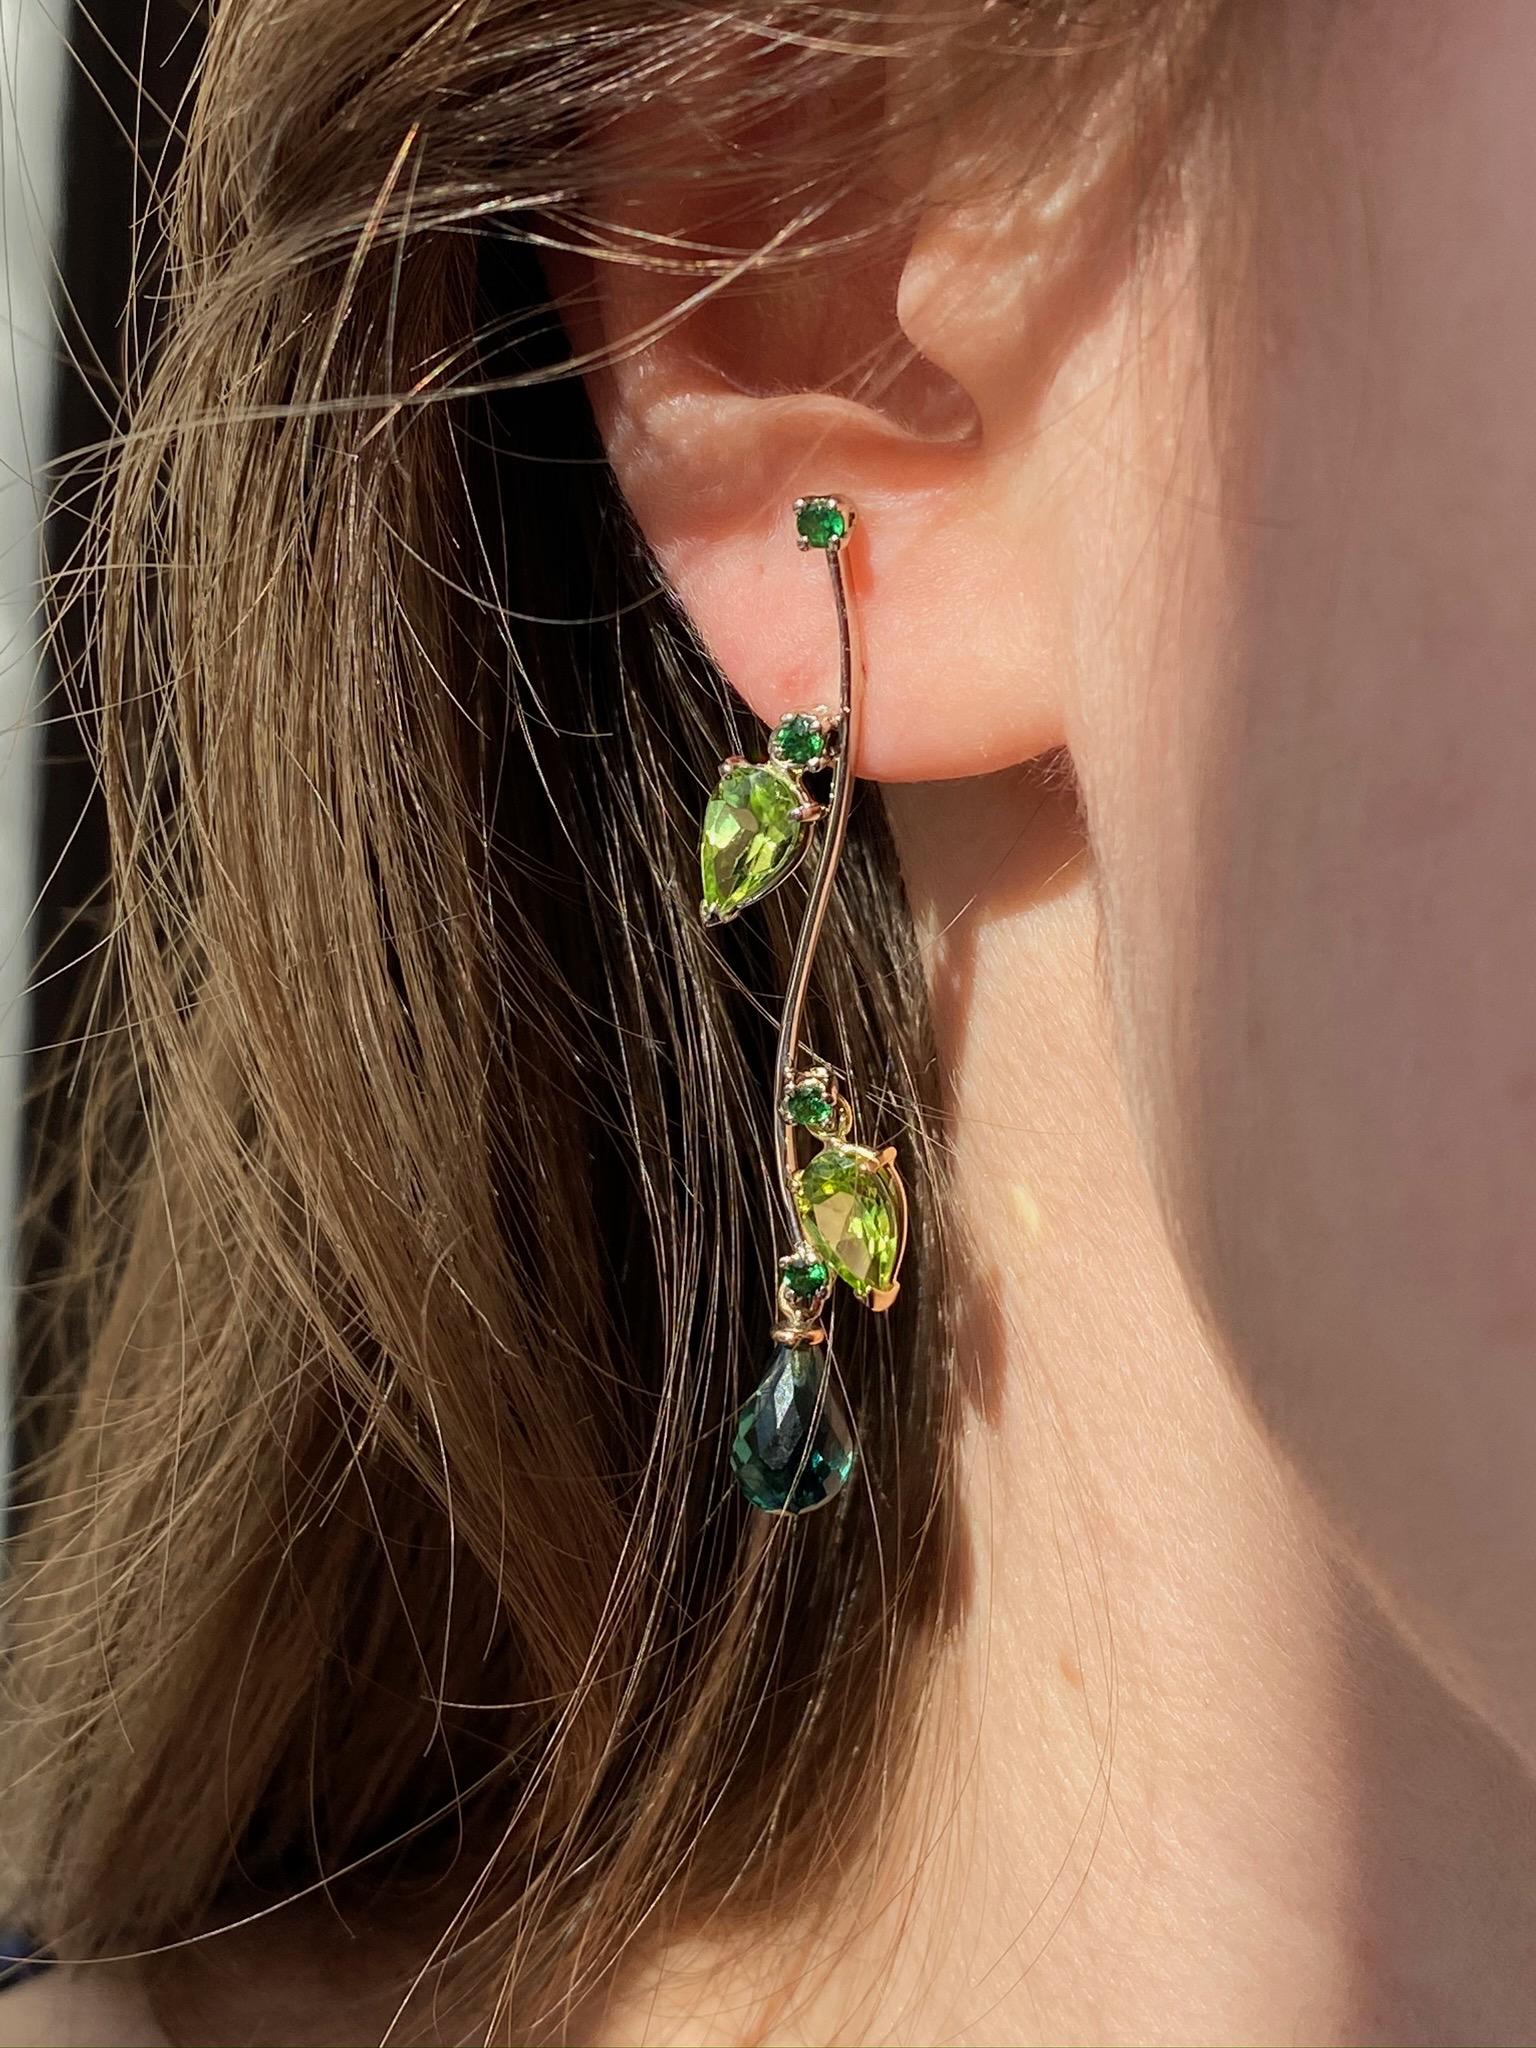 Rossella Ugolini Design Collection a Modern Style dangle earrings handcrafted in 18 Karats Gold with three shade of green colors:  Peridot pear cut,  Tsavorite round cut , green Tourmaline brioilet drops.  The branches of the trees of Villa Borghese